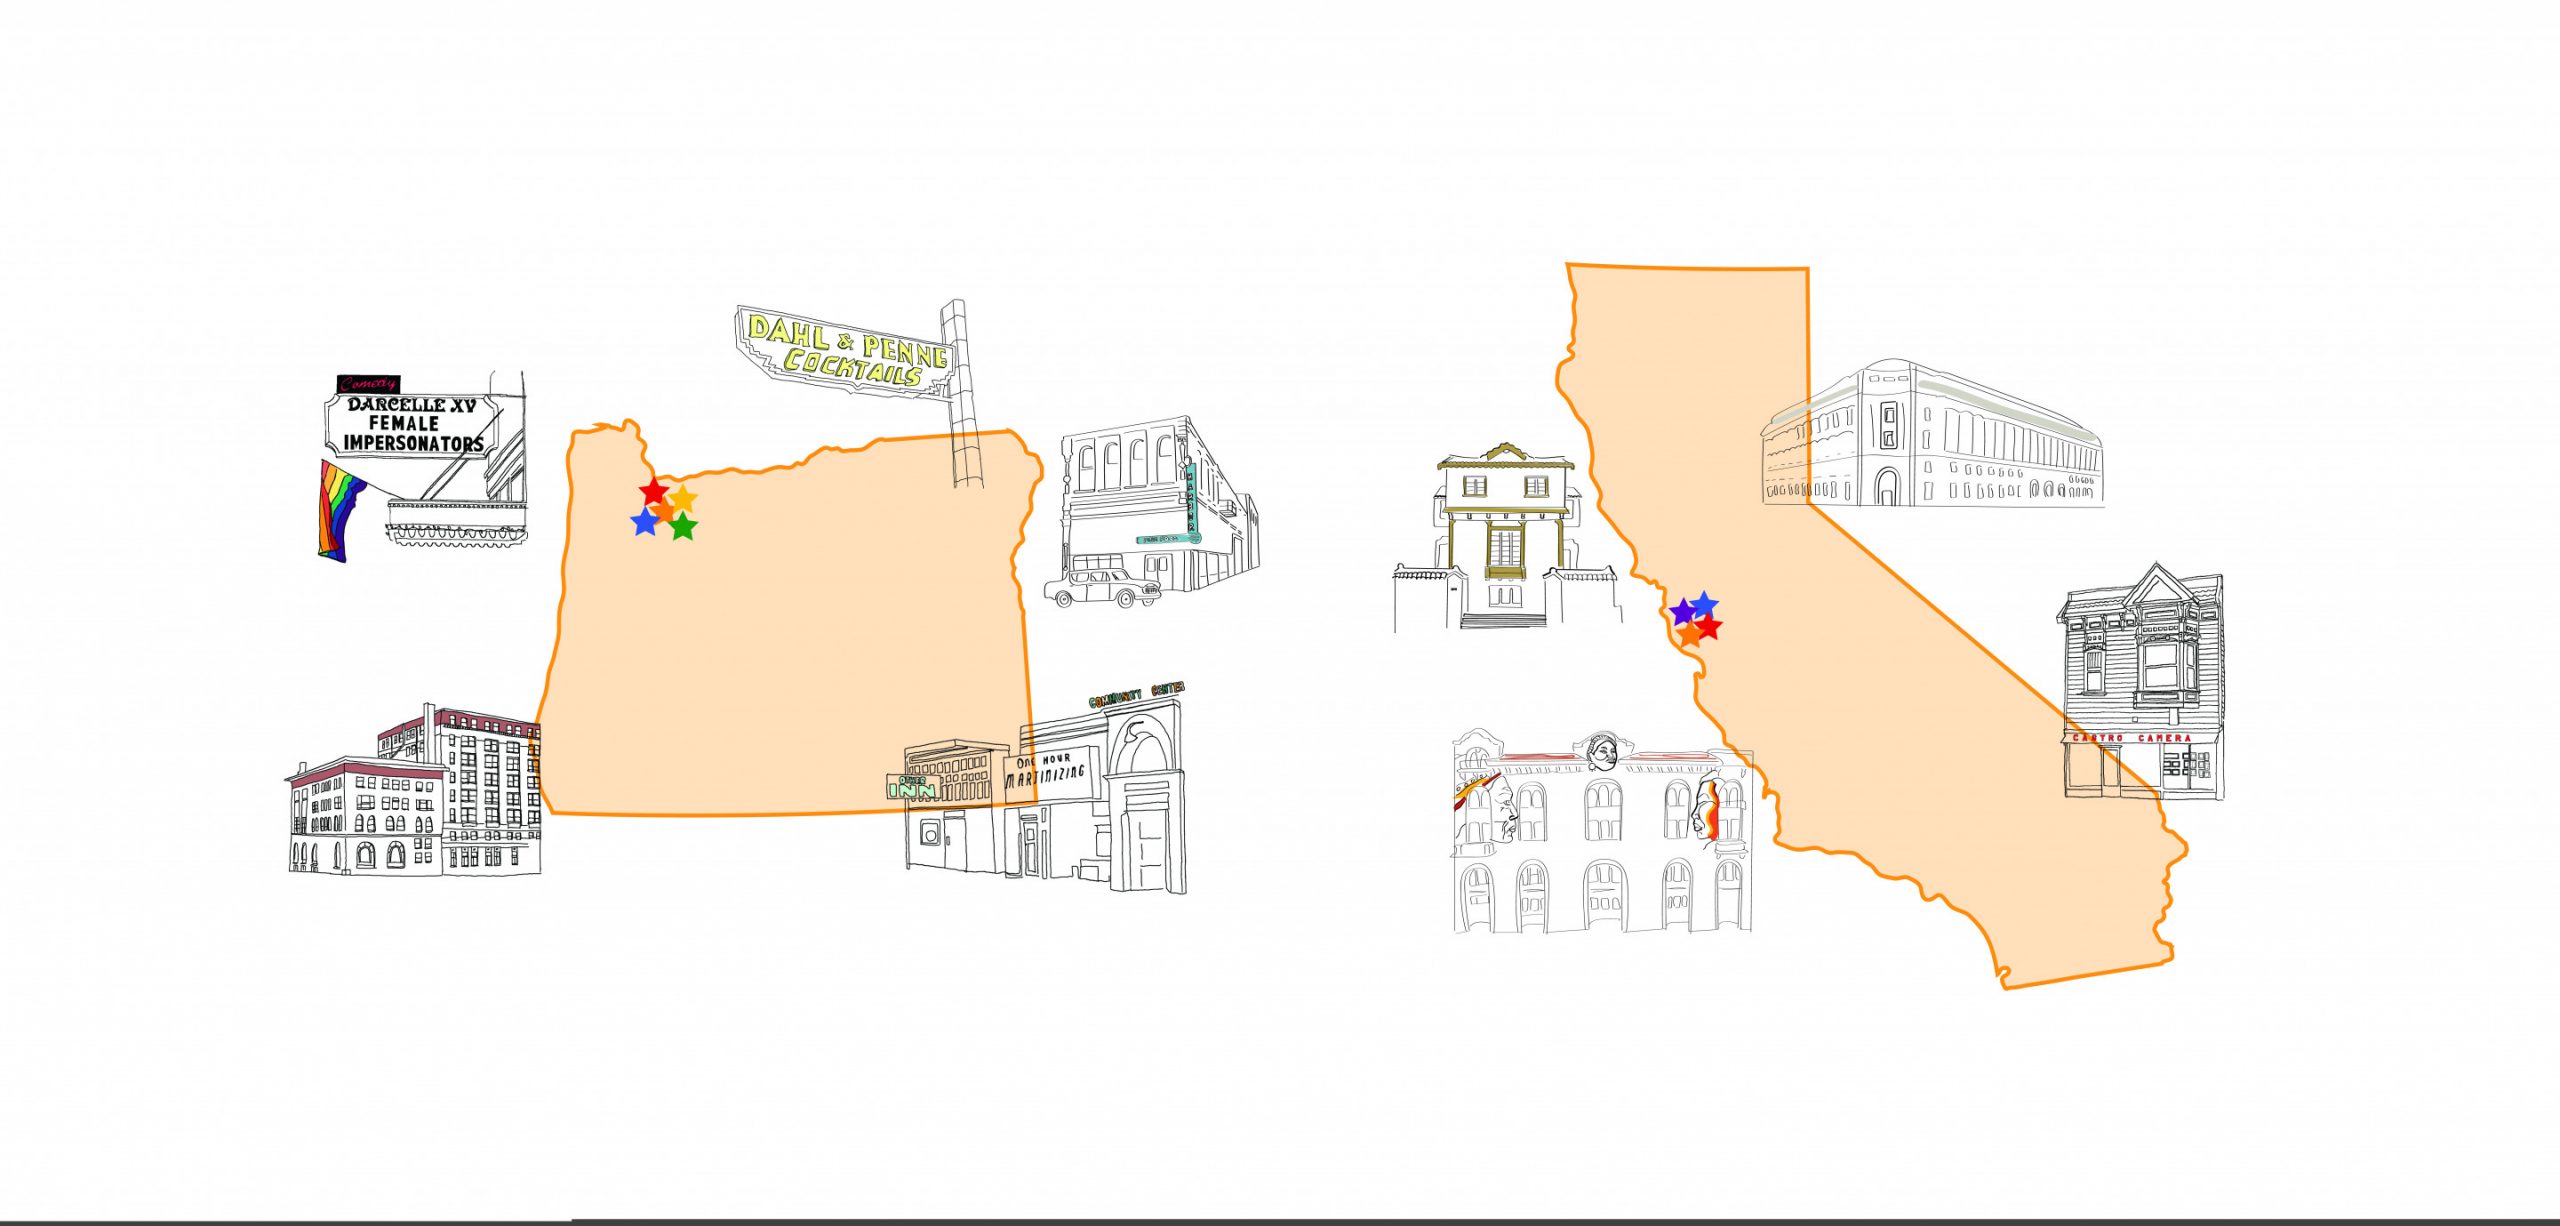 Map Of Oregon And California With Illustrations Of Buildings